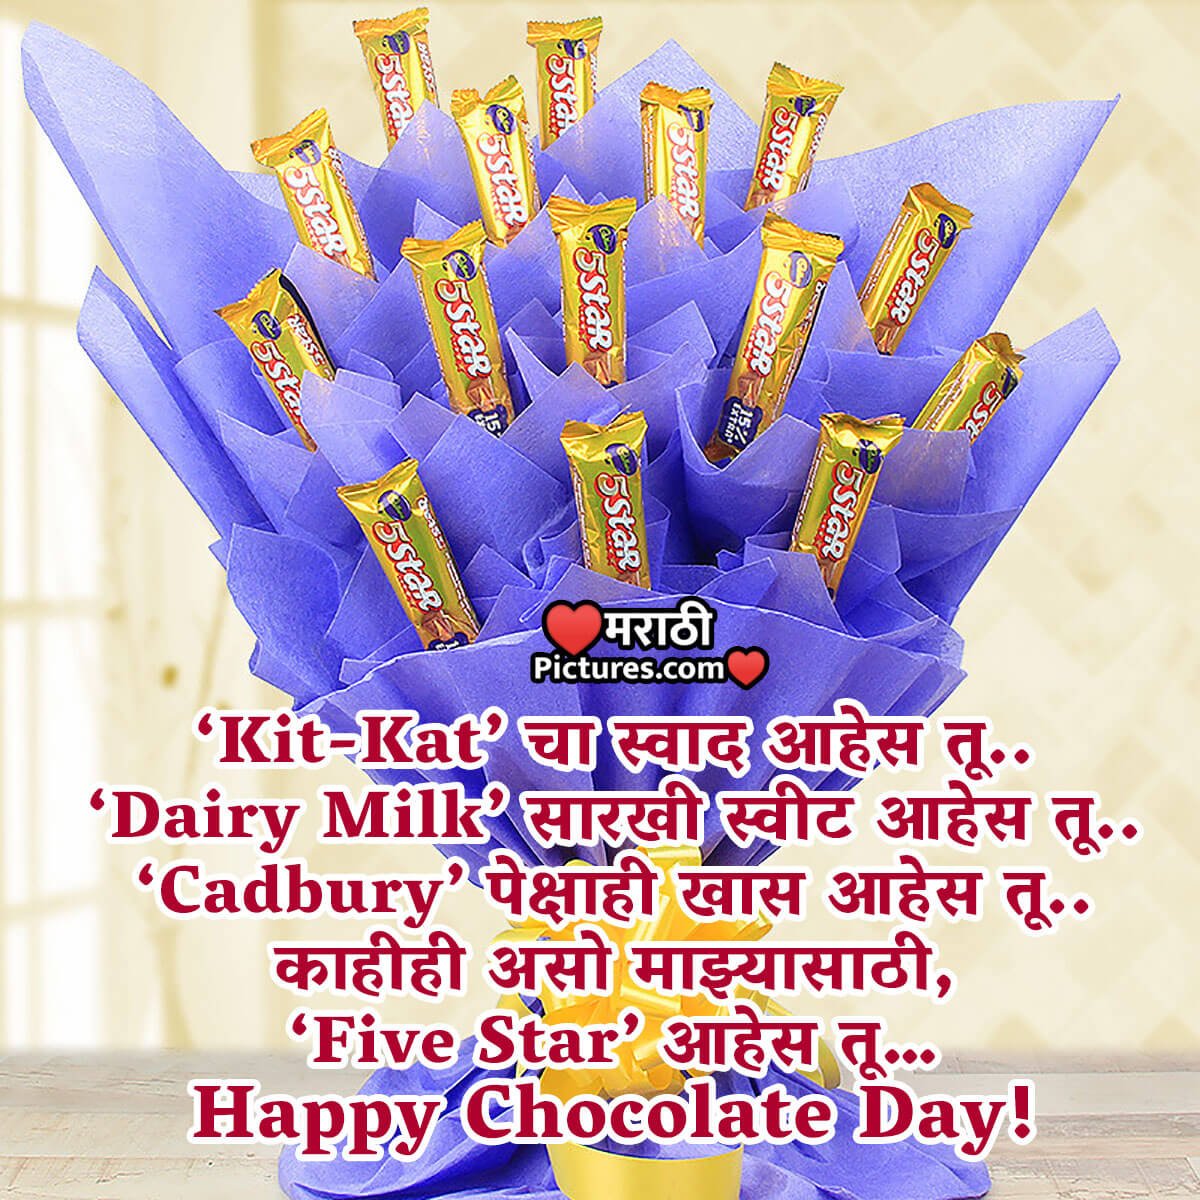 Chocolate Day Message In Marathi